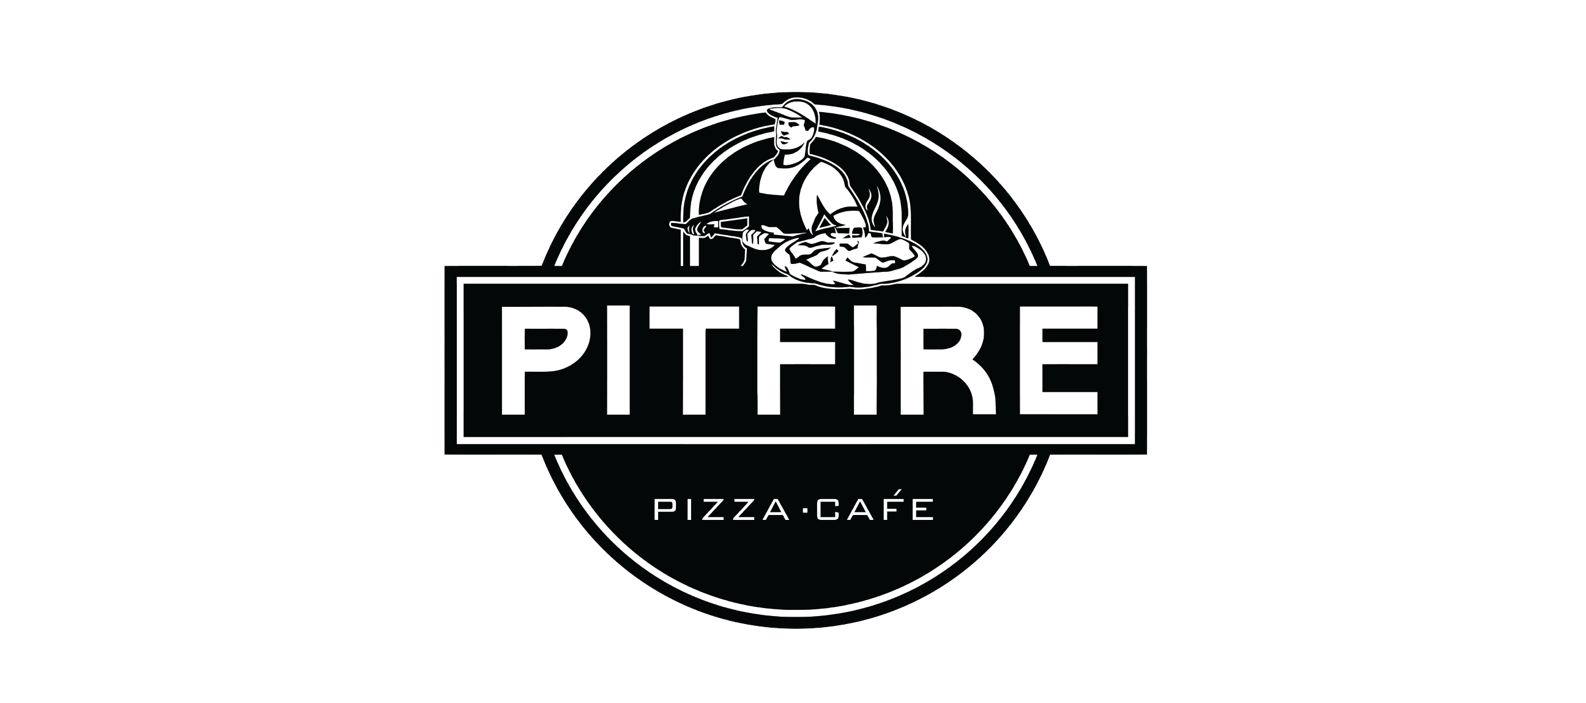 Spitfire Pizza Logo - The Gun Slinging Business Story Behind Pitfire Pizza In Dubai